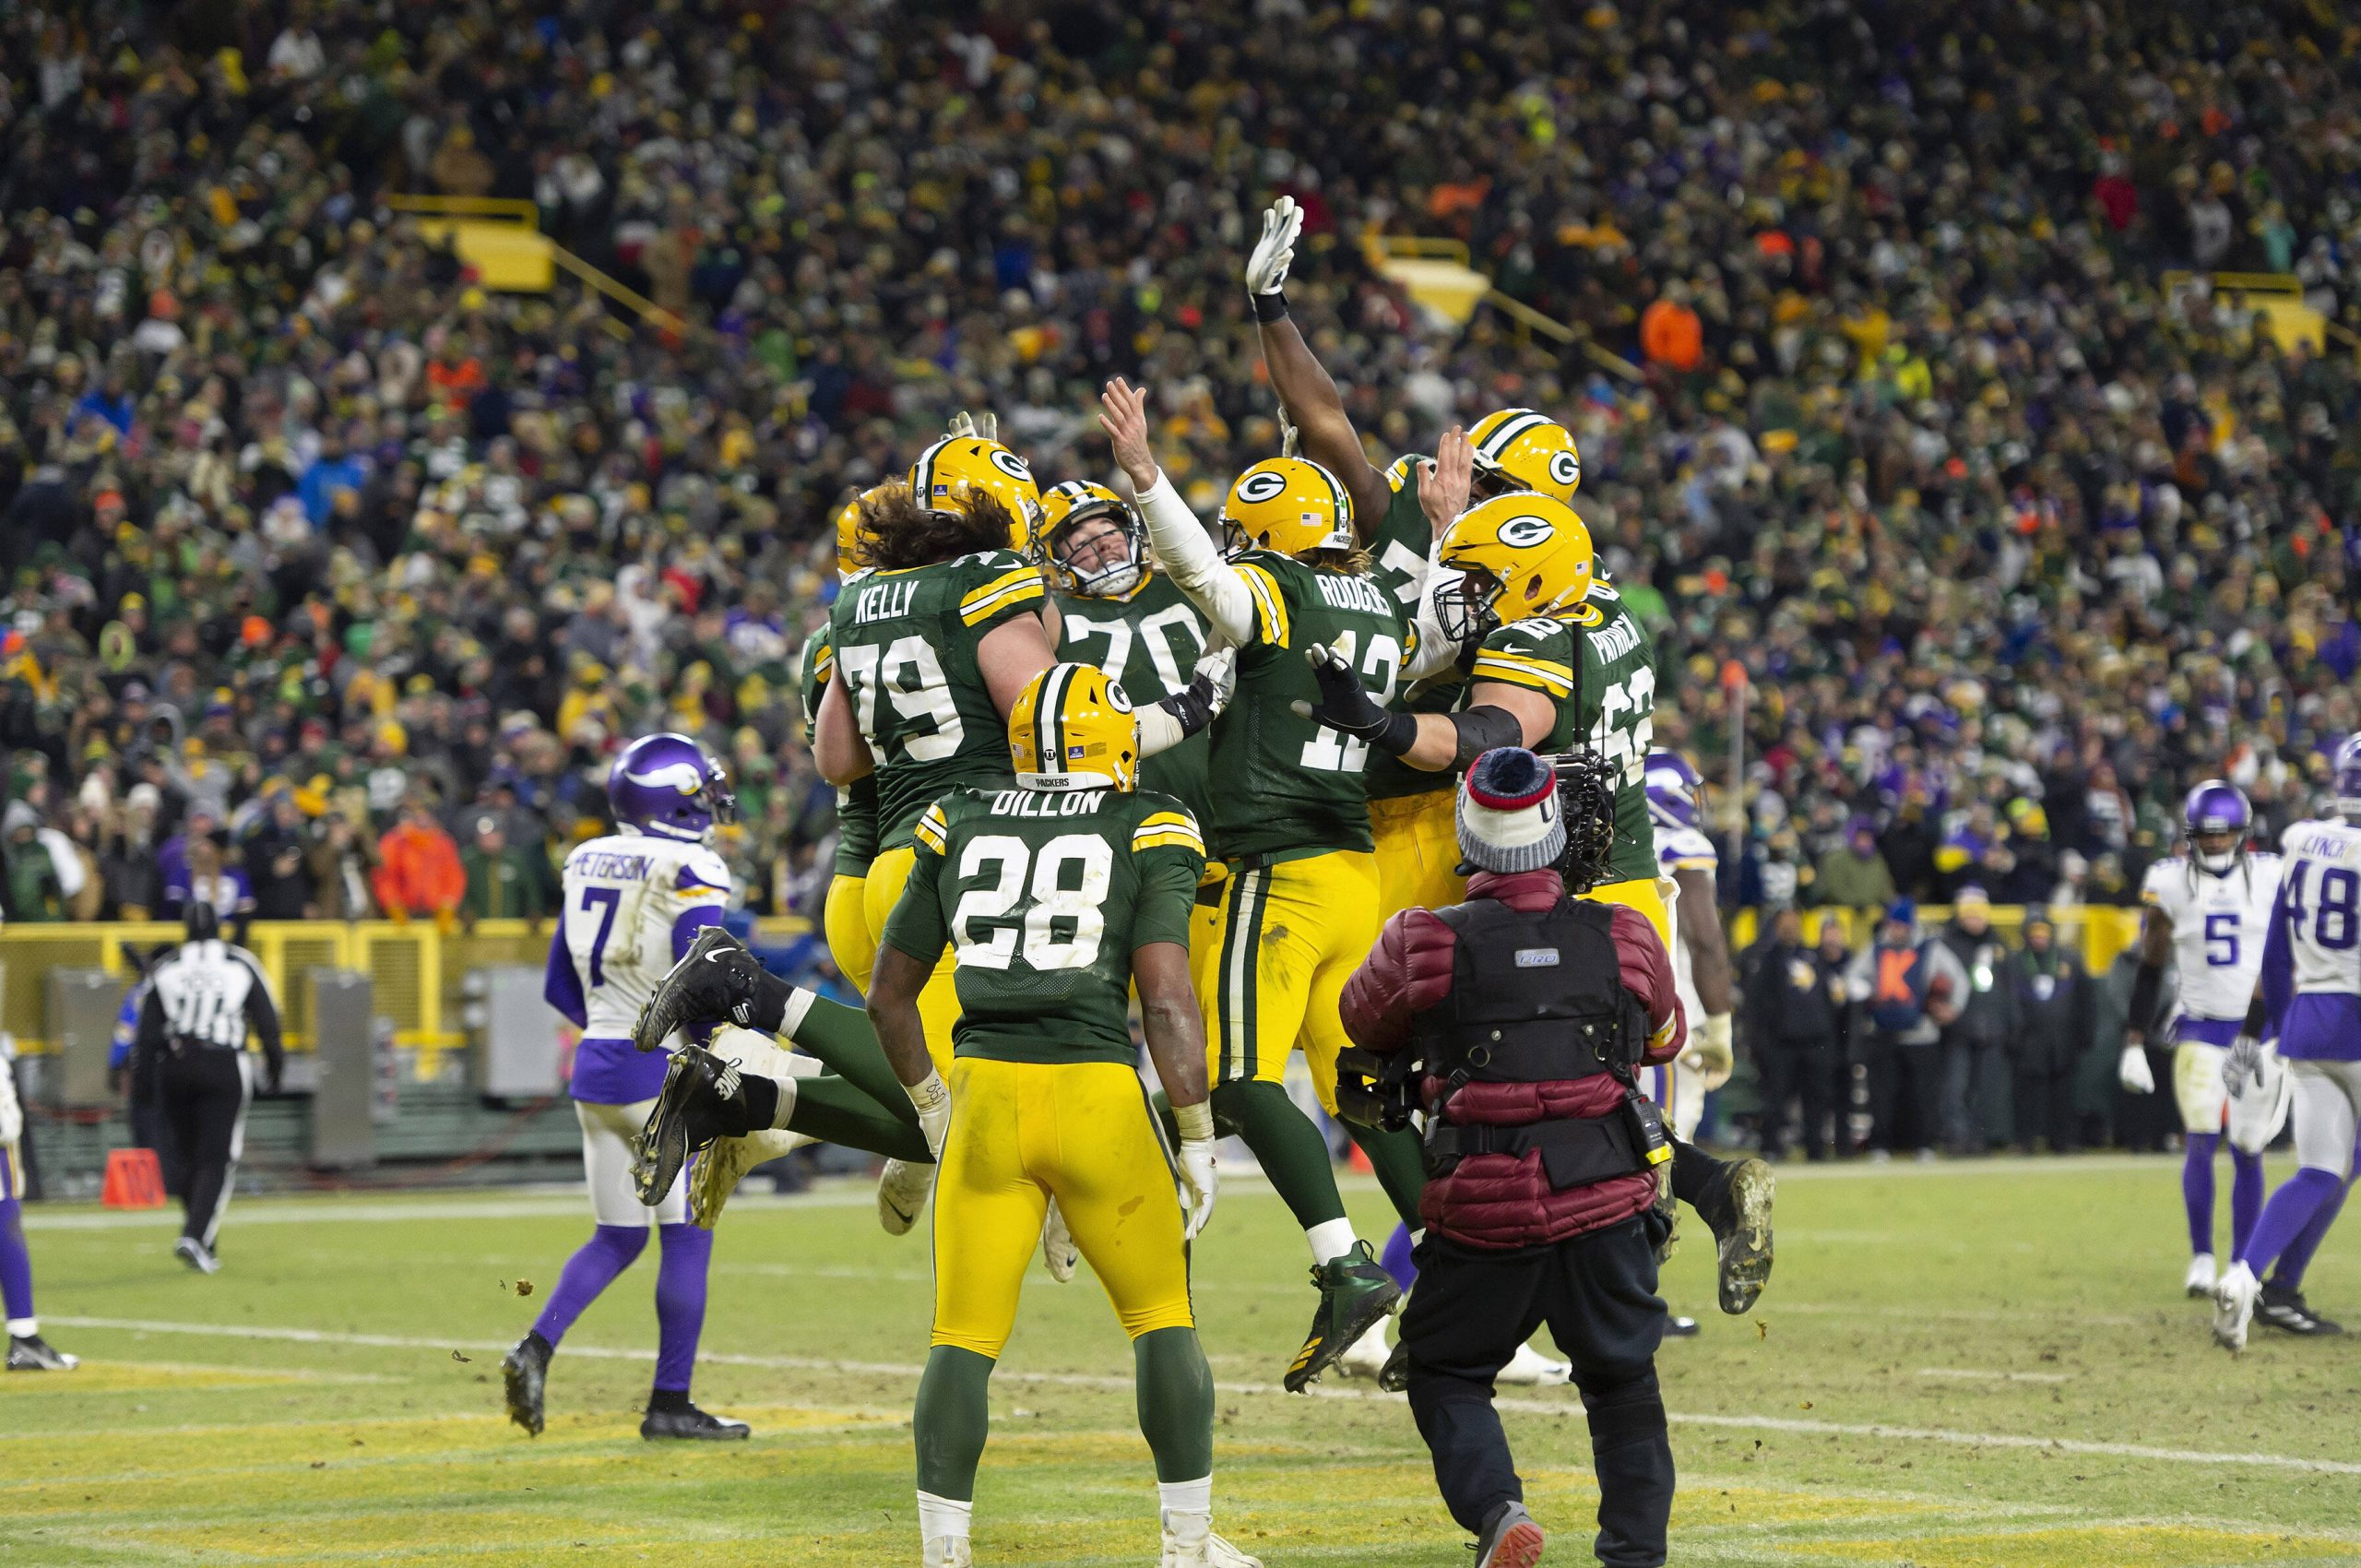 Green Bay Packers running back A.J. Dillon 28 and Packers quarterback Aaron Rodgers